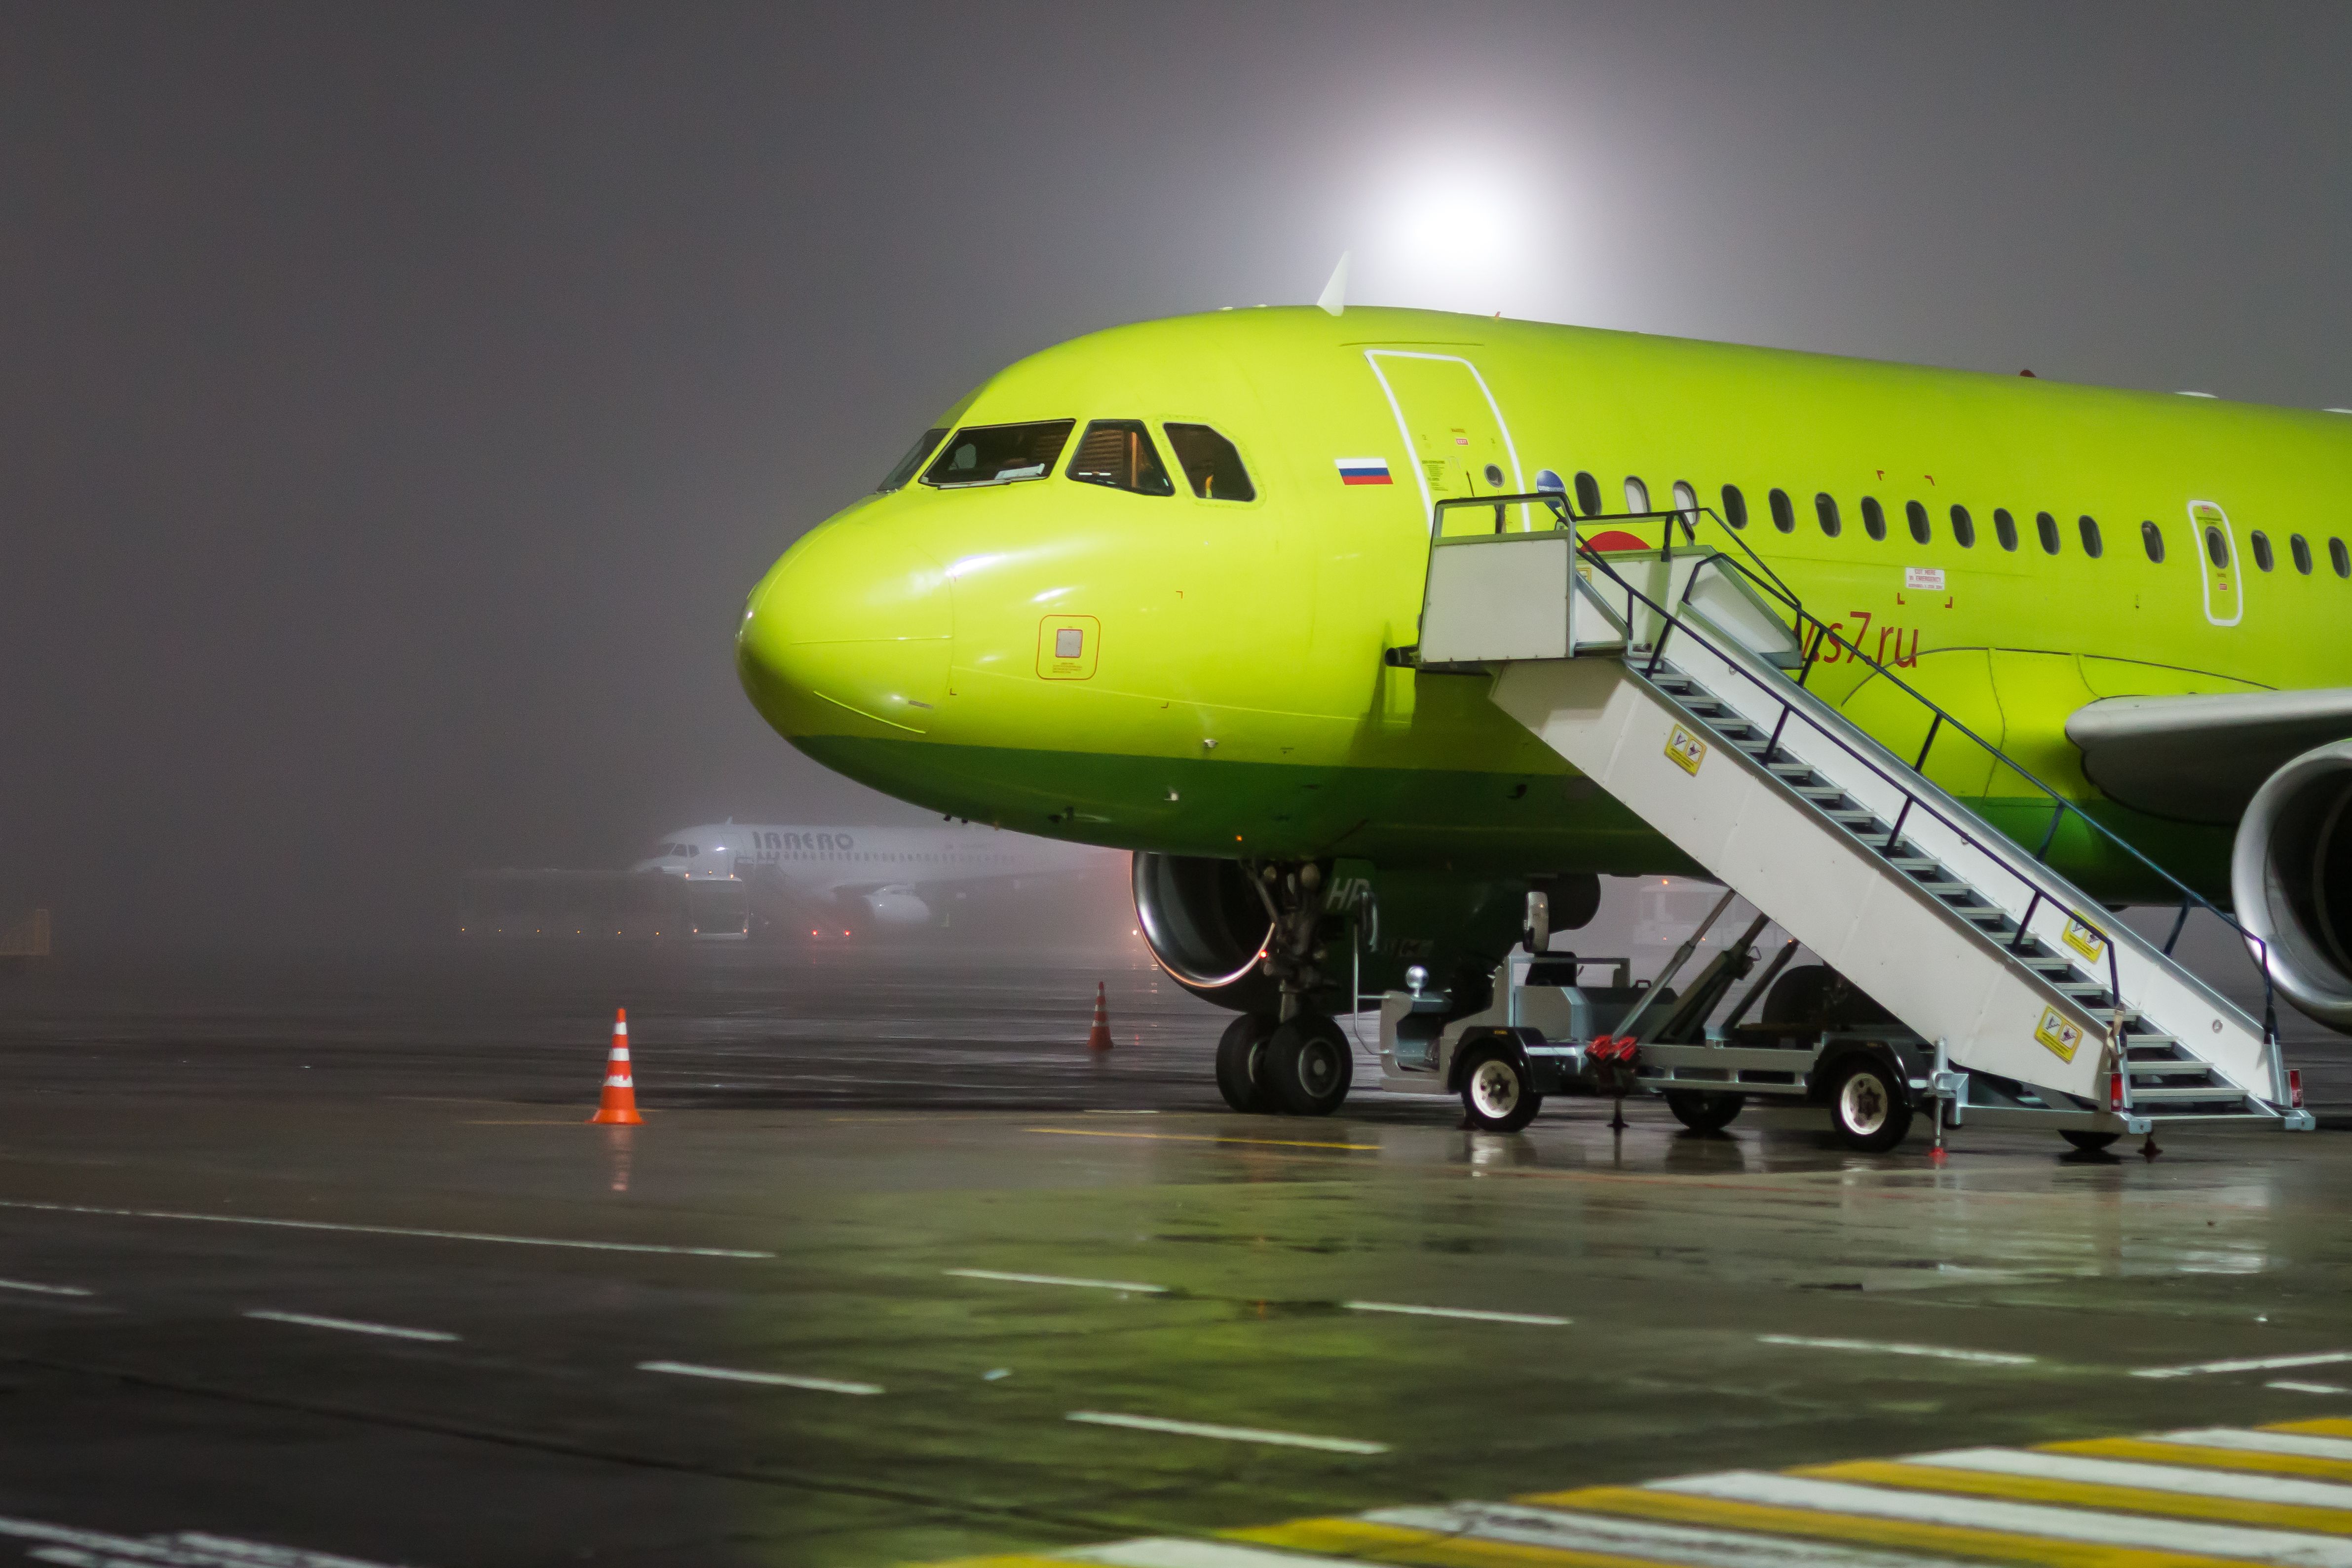 A S7 Airlines A320 parked at an airport